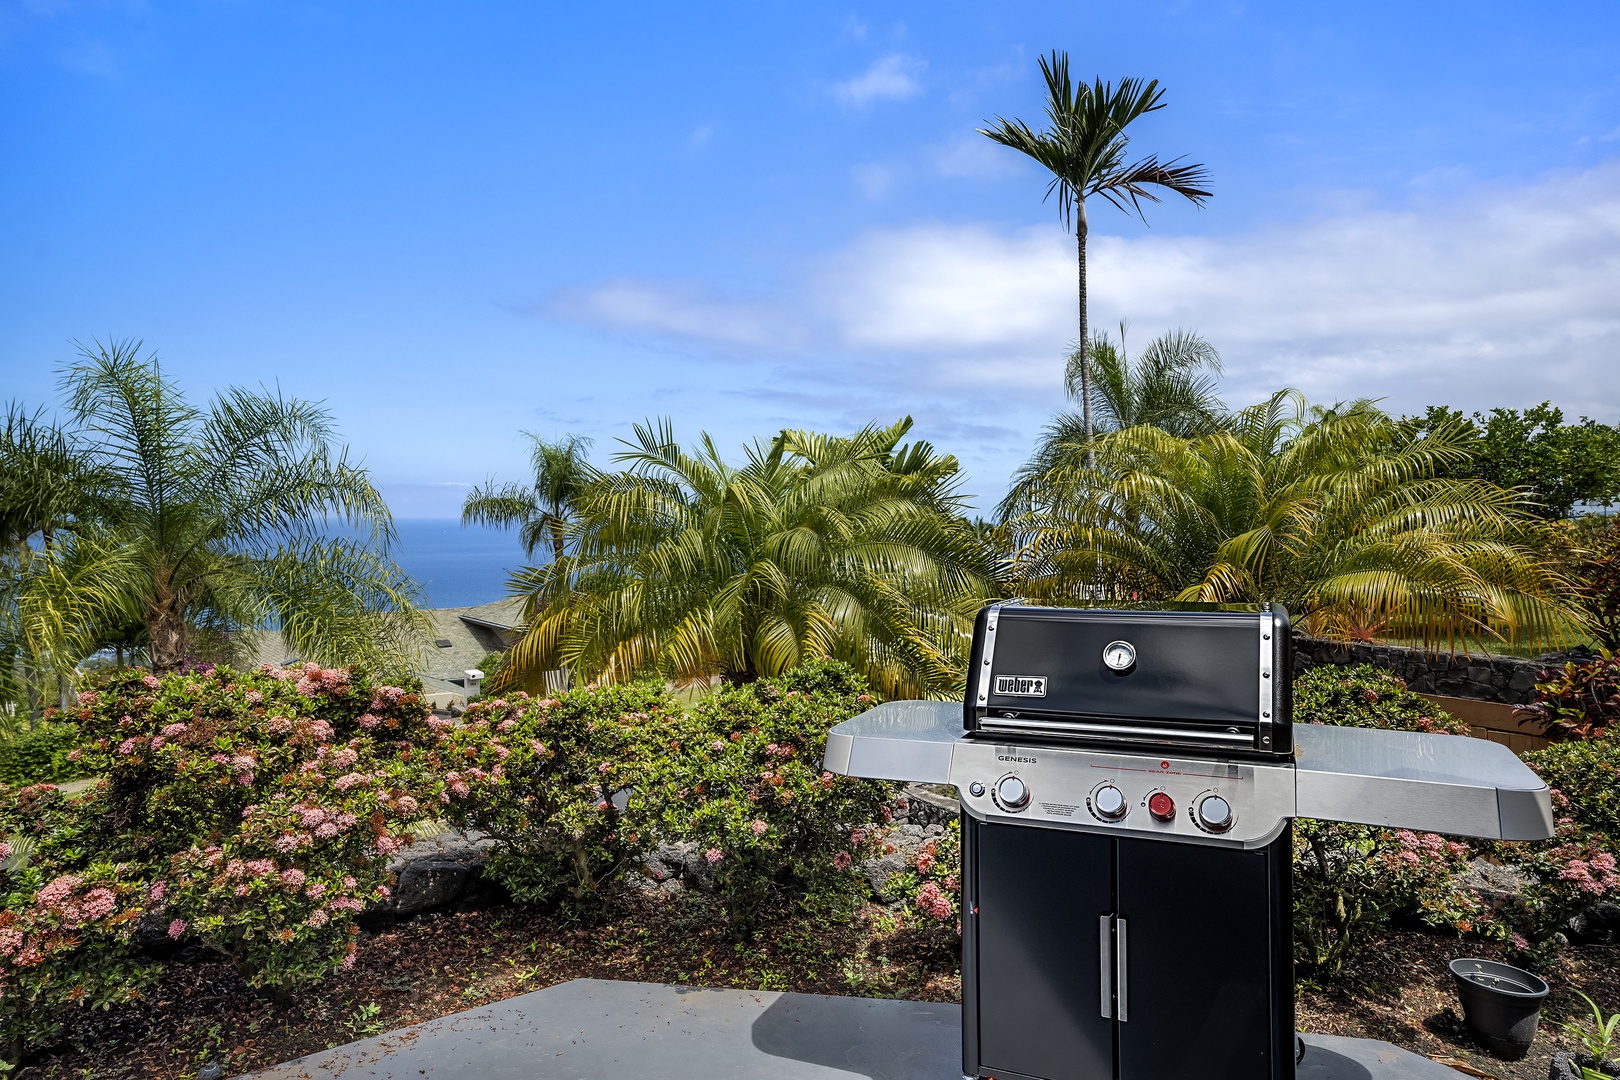 Kailua Kona Vacation Rentals, Pineapple House - BBQ on the provided Weber grill!